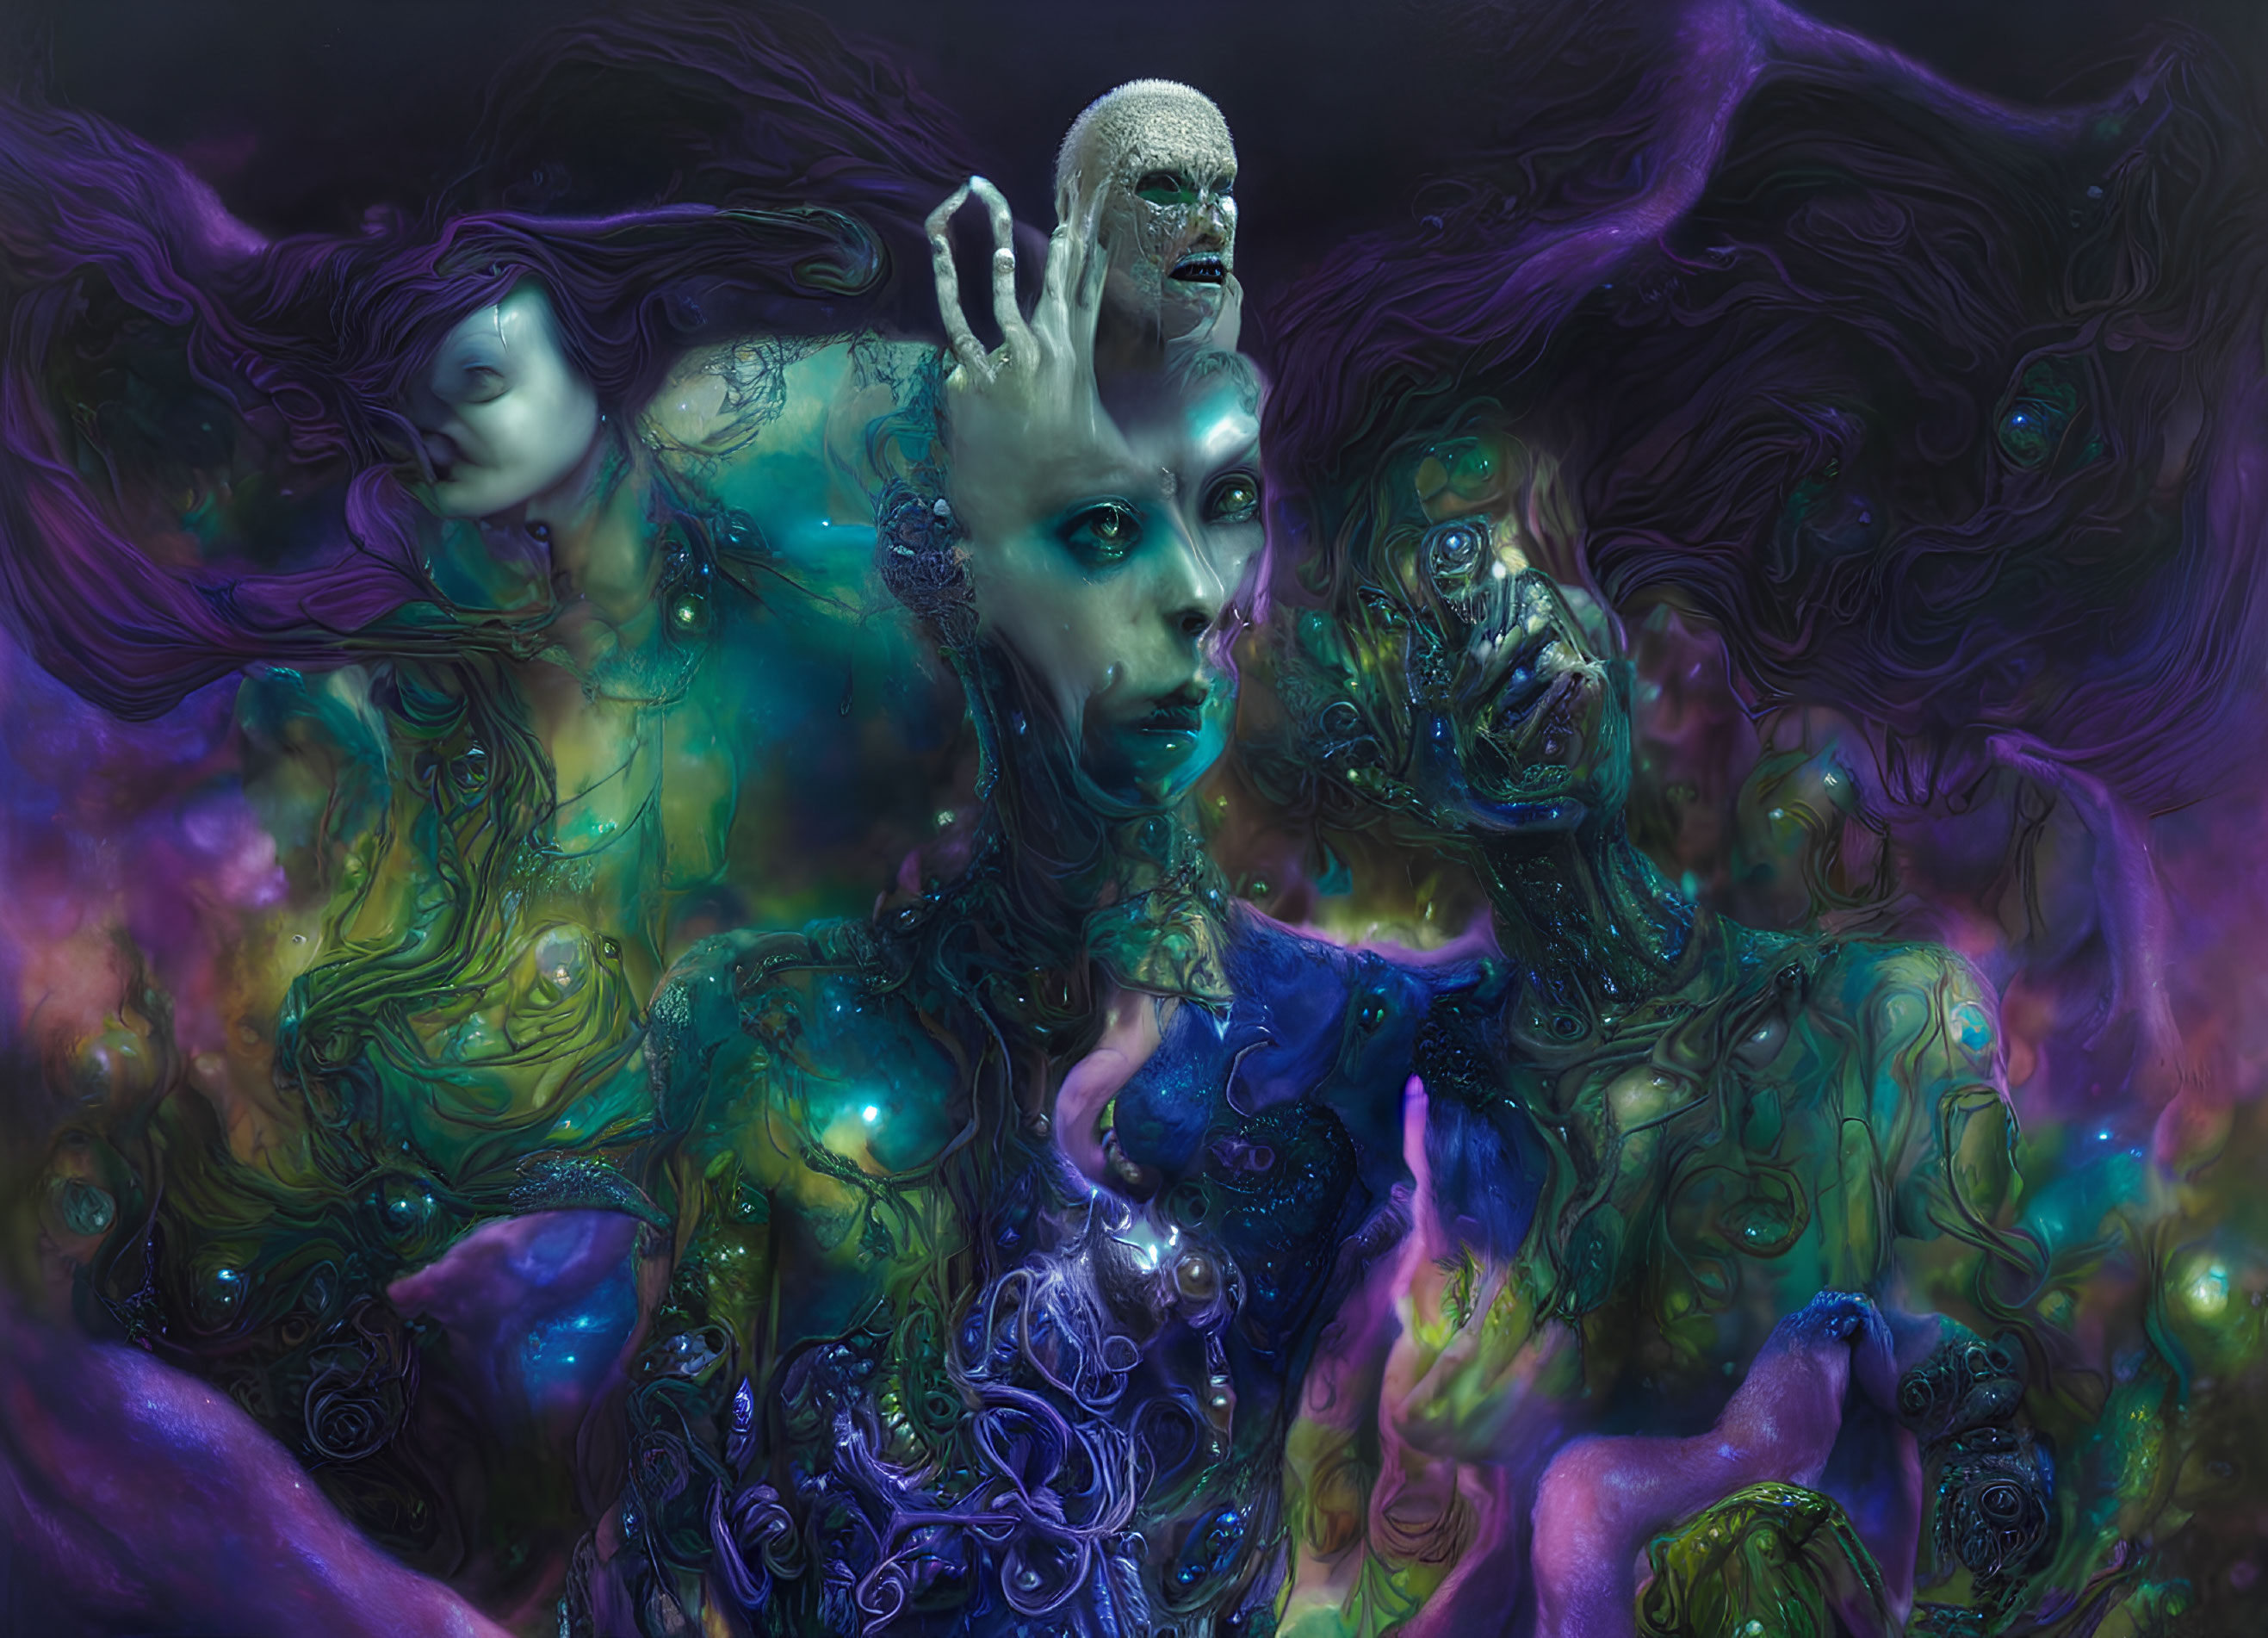 Surreal humanoid figures in colorful purple and green nebula